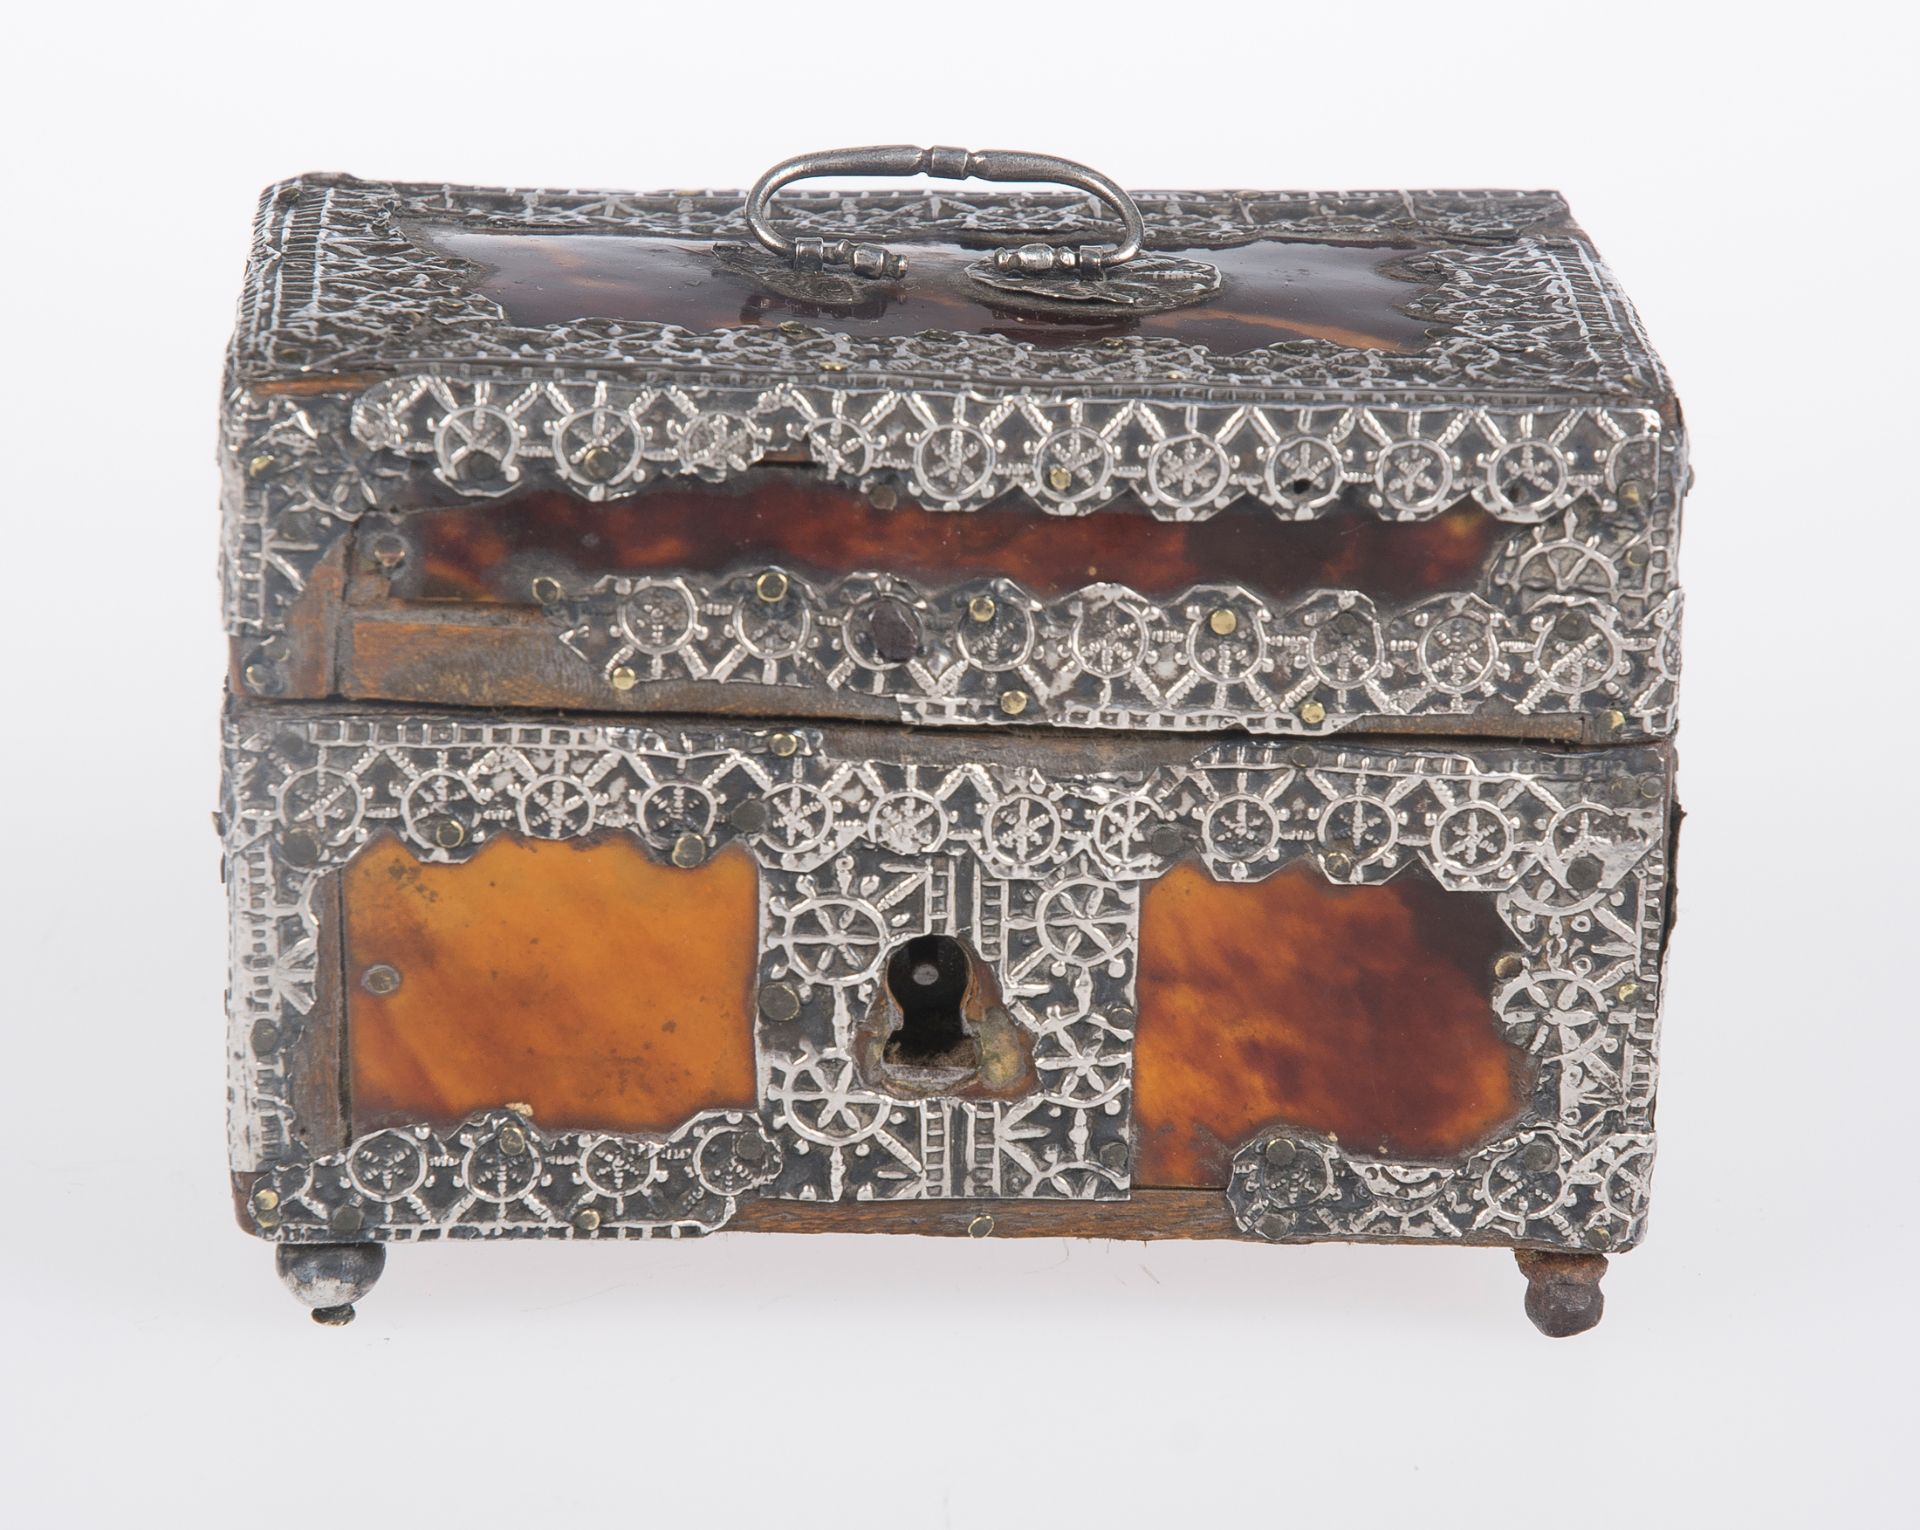 Small wooden chest covered in tortoiseshell and silver. Dutch colonies. Indonesia. 17th century. - Image 2 of 6